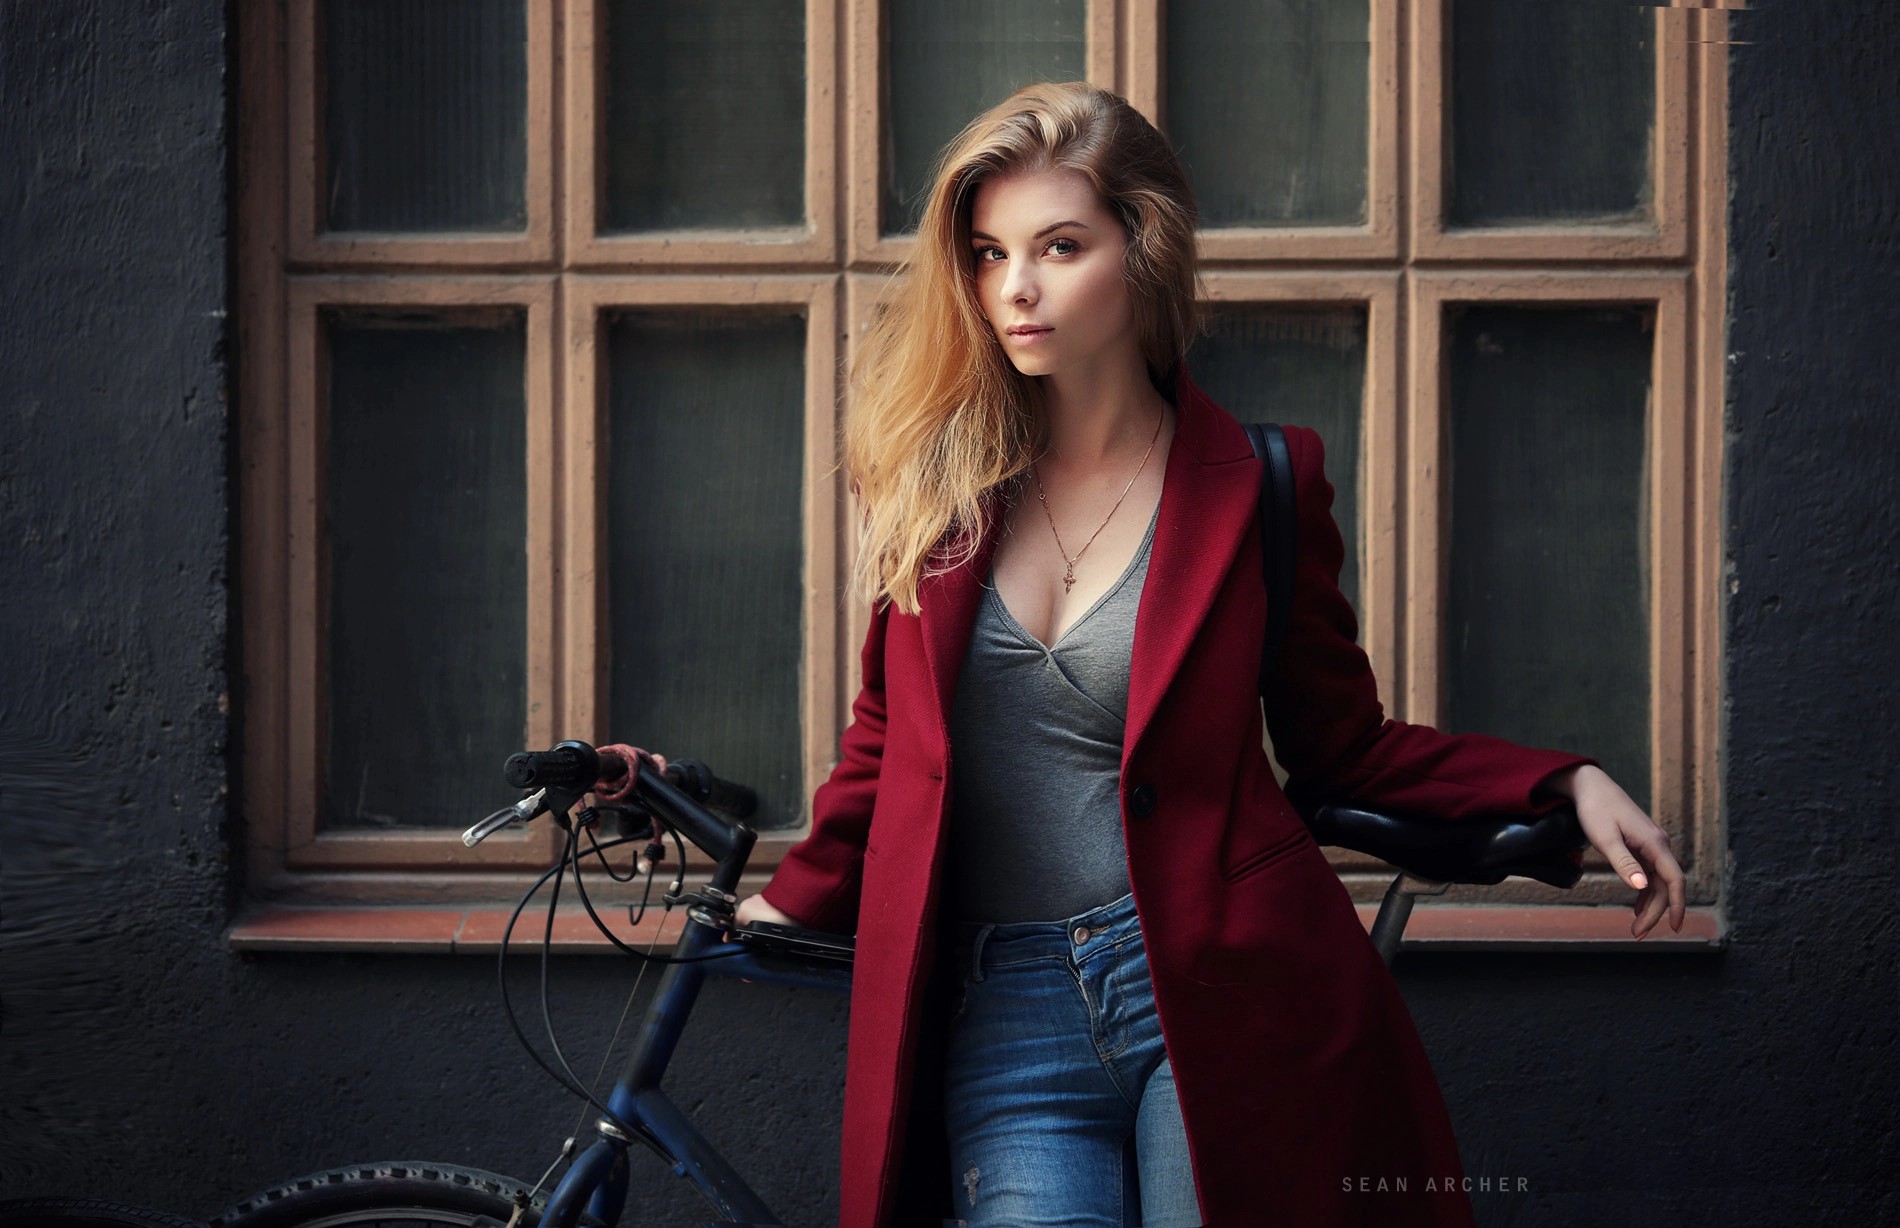 Irina Popova Blonde Women Outdoors Necklace Straight Hair Jeans Portrait Bicycle Looking At Viewer W 1900x1228